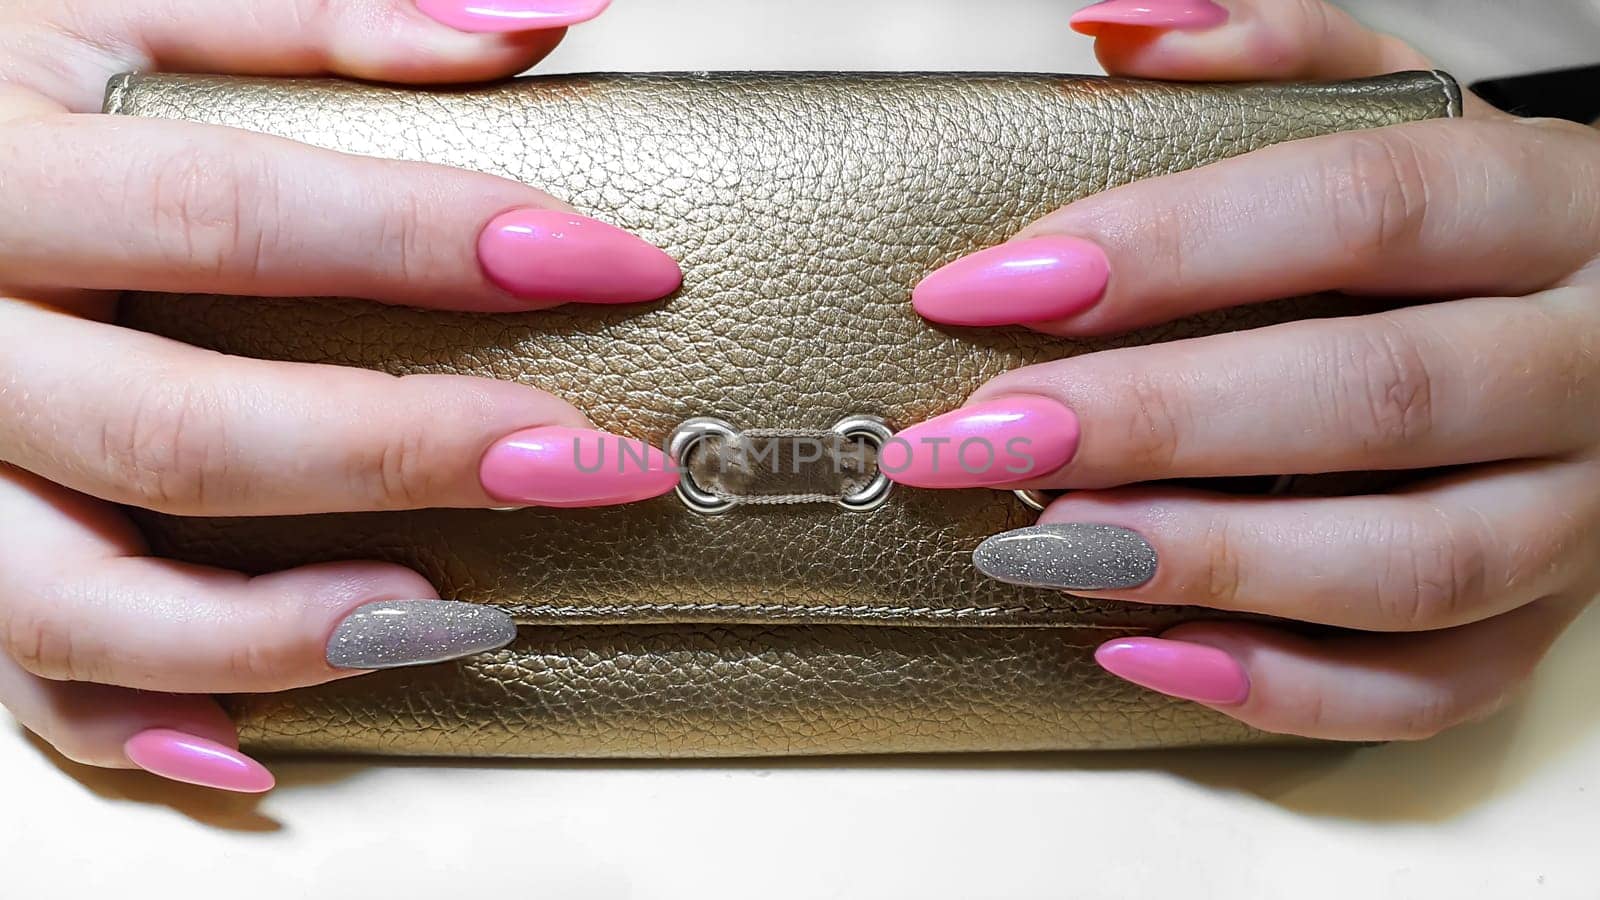 Acrylic nail extension, manicure, nail correction, hands in the foreground. Bright design. copy space